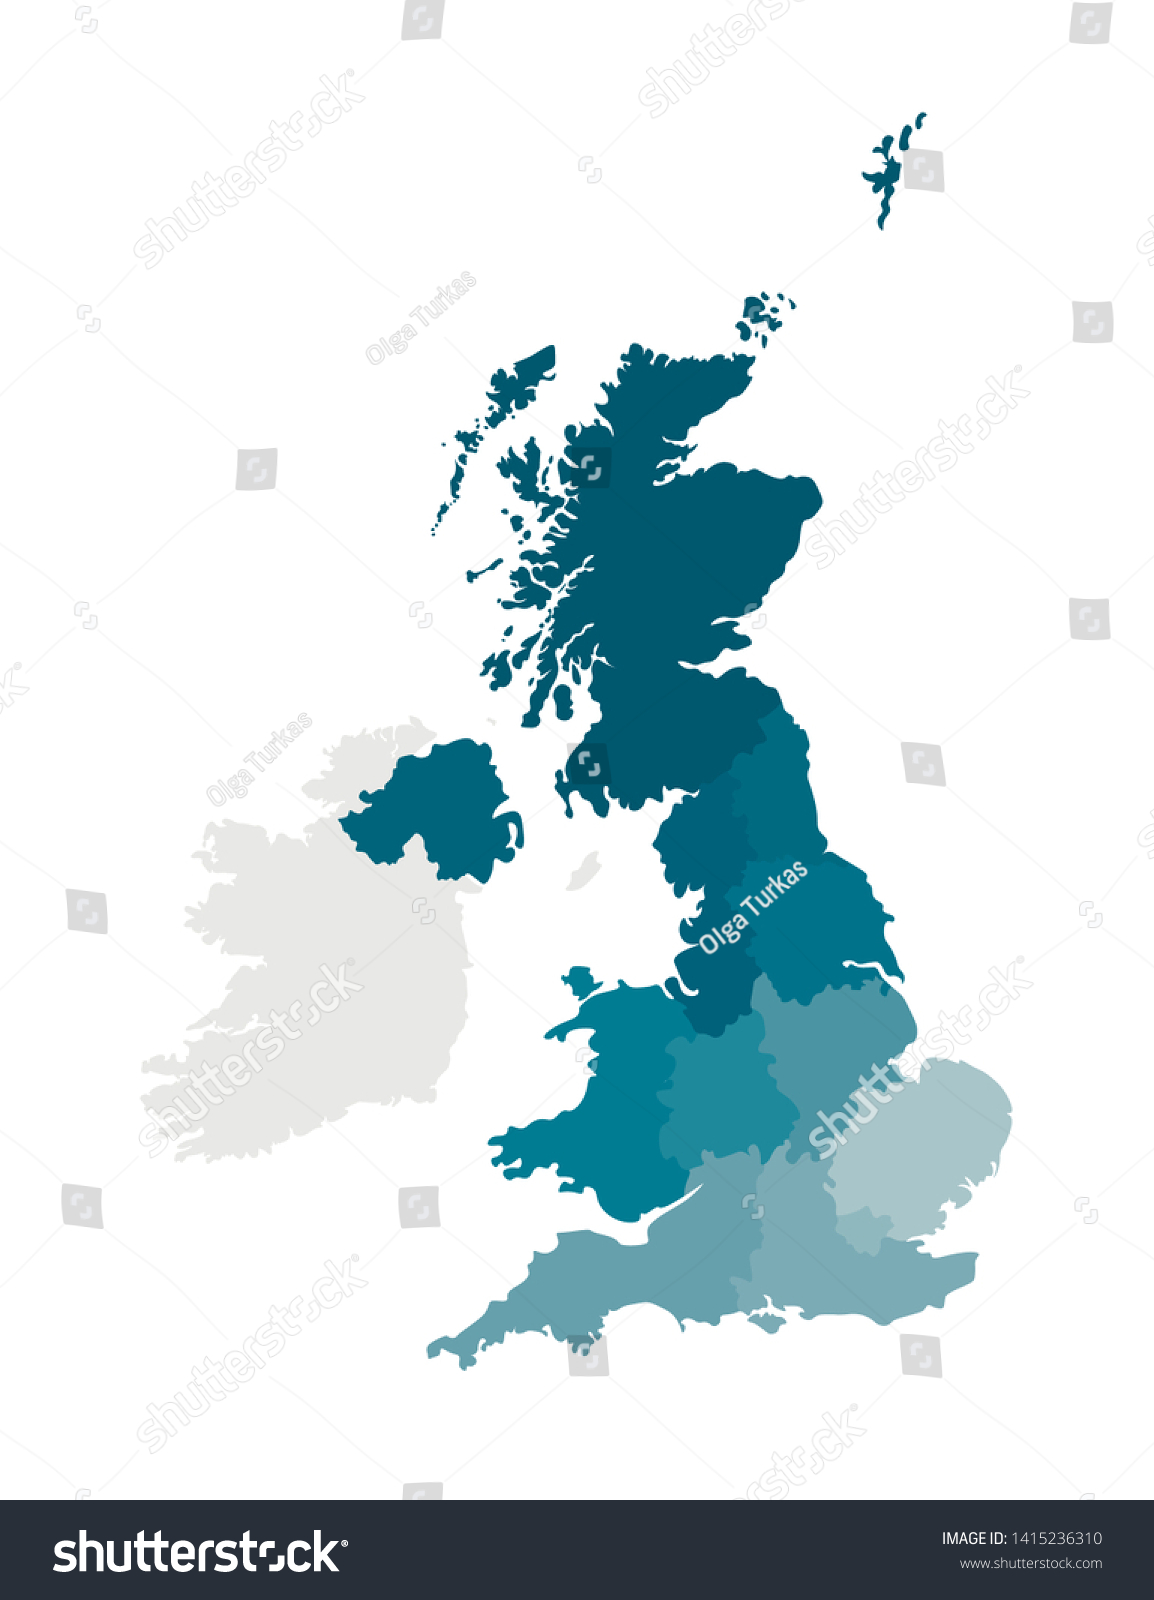 SVG of Vector isolated illustration of simplified administrative map of the United Kingdom of Great Britain and Northern Ireland. Borders of the regions. Colorful blue khaki silhouettes svg